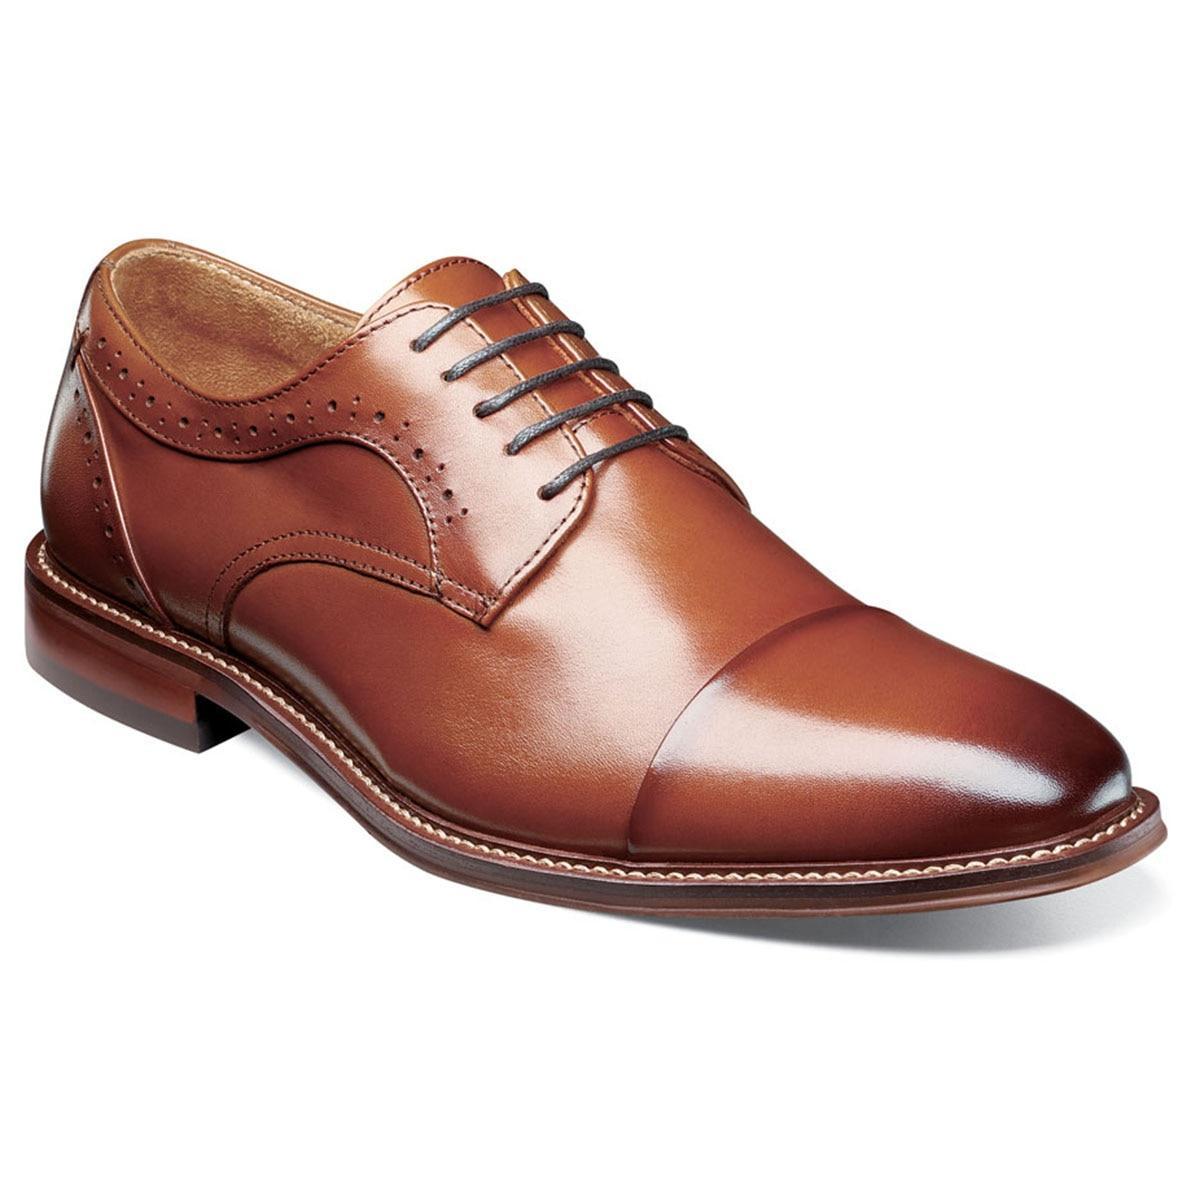 Stacy Adams Maddox Cap Toe Derby Product Image